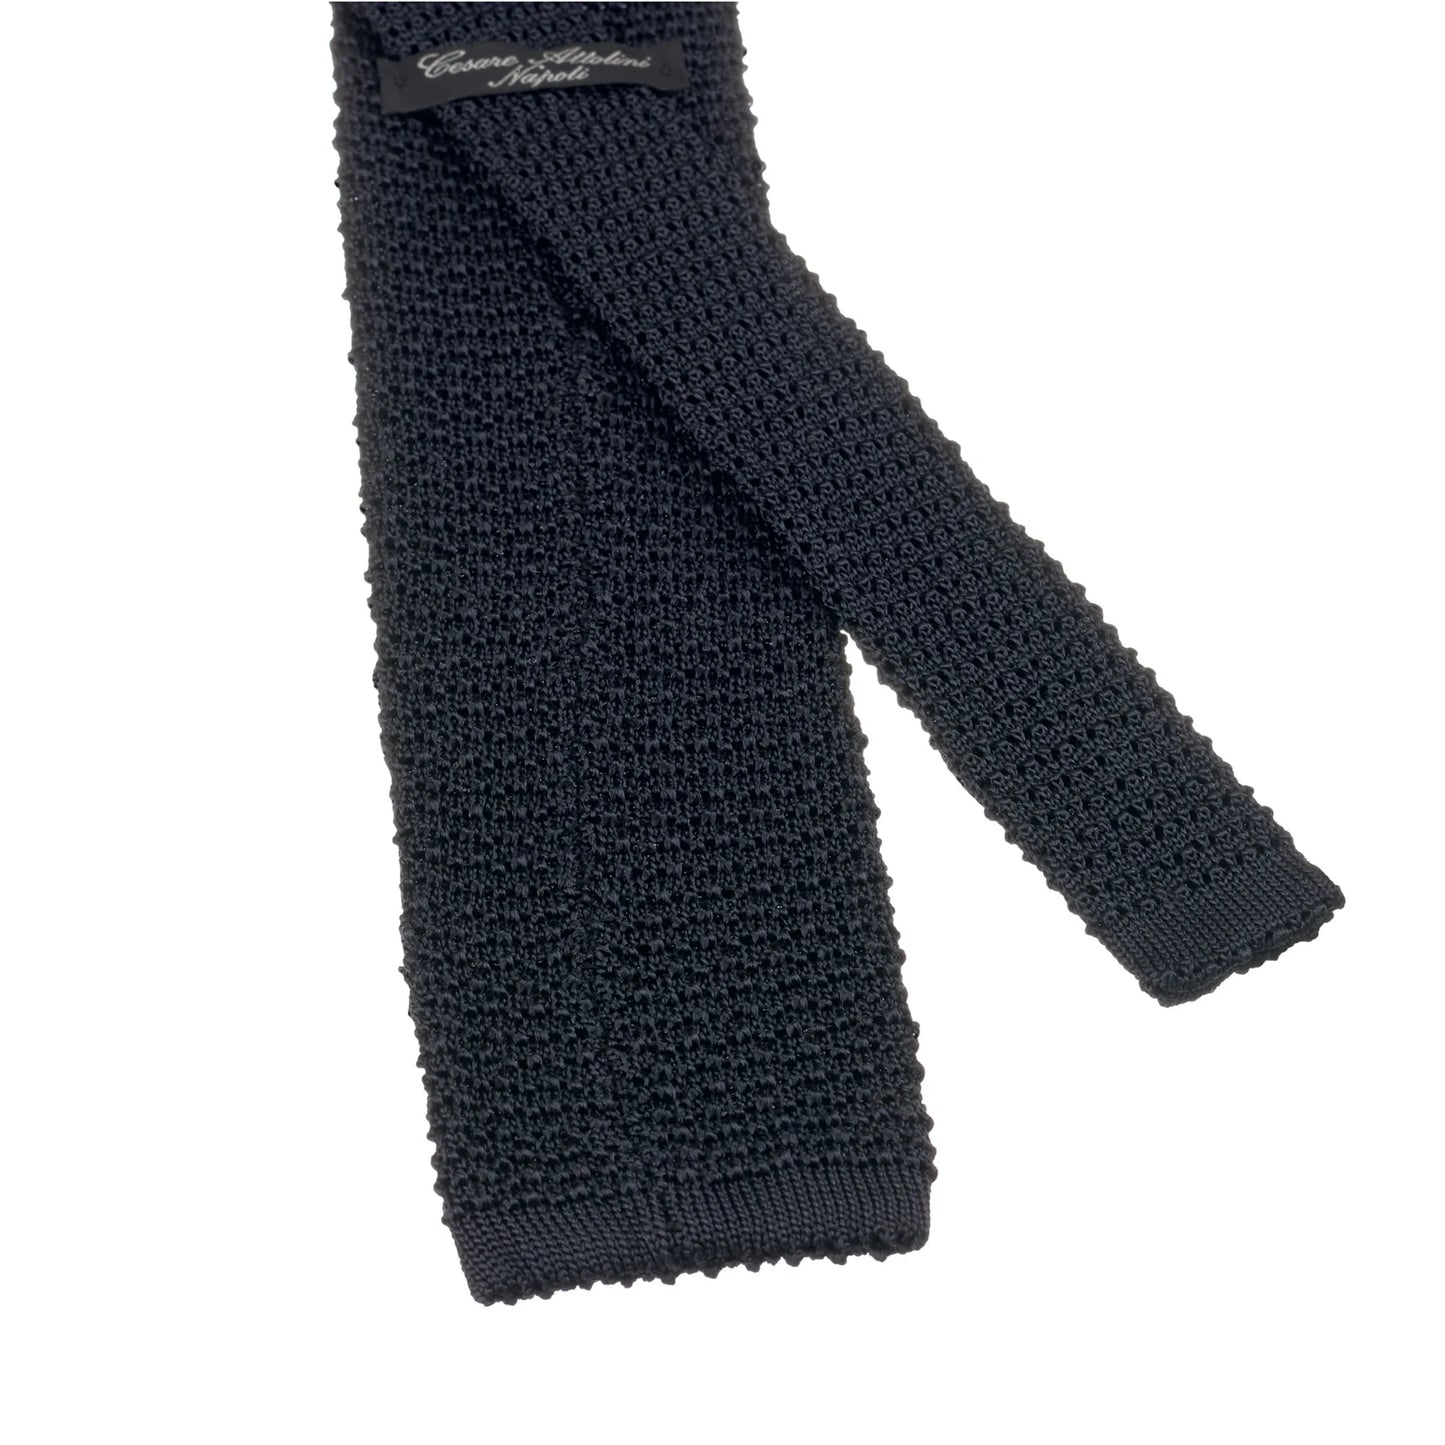 Polka Dot Knitted Silk Tie in Dark Blue and Brown